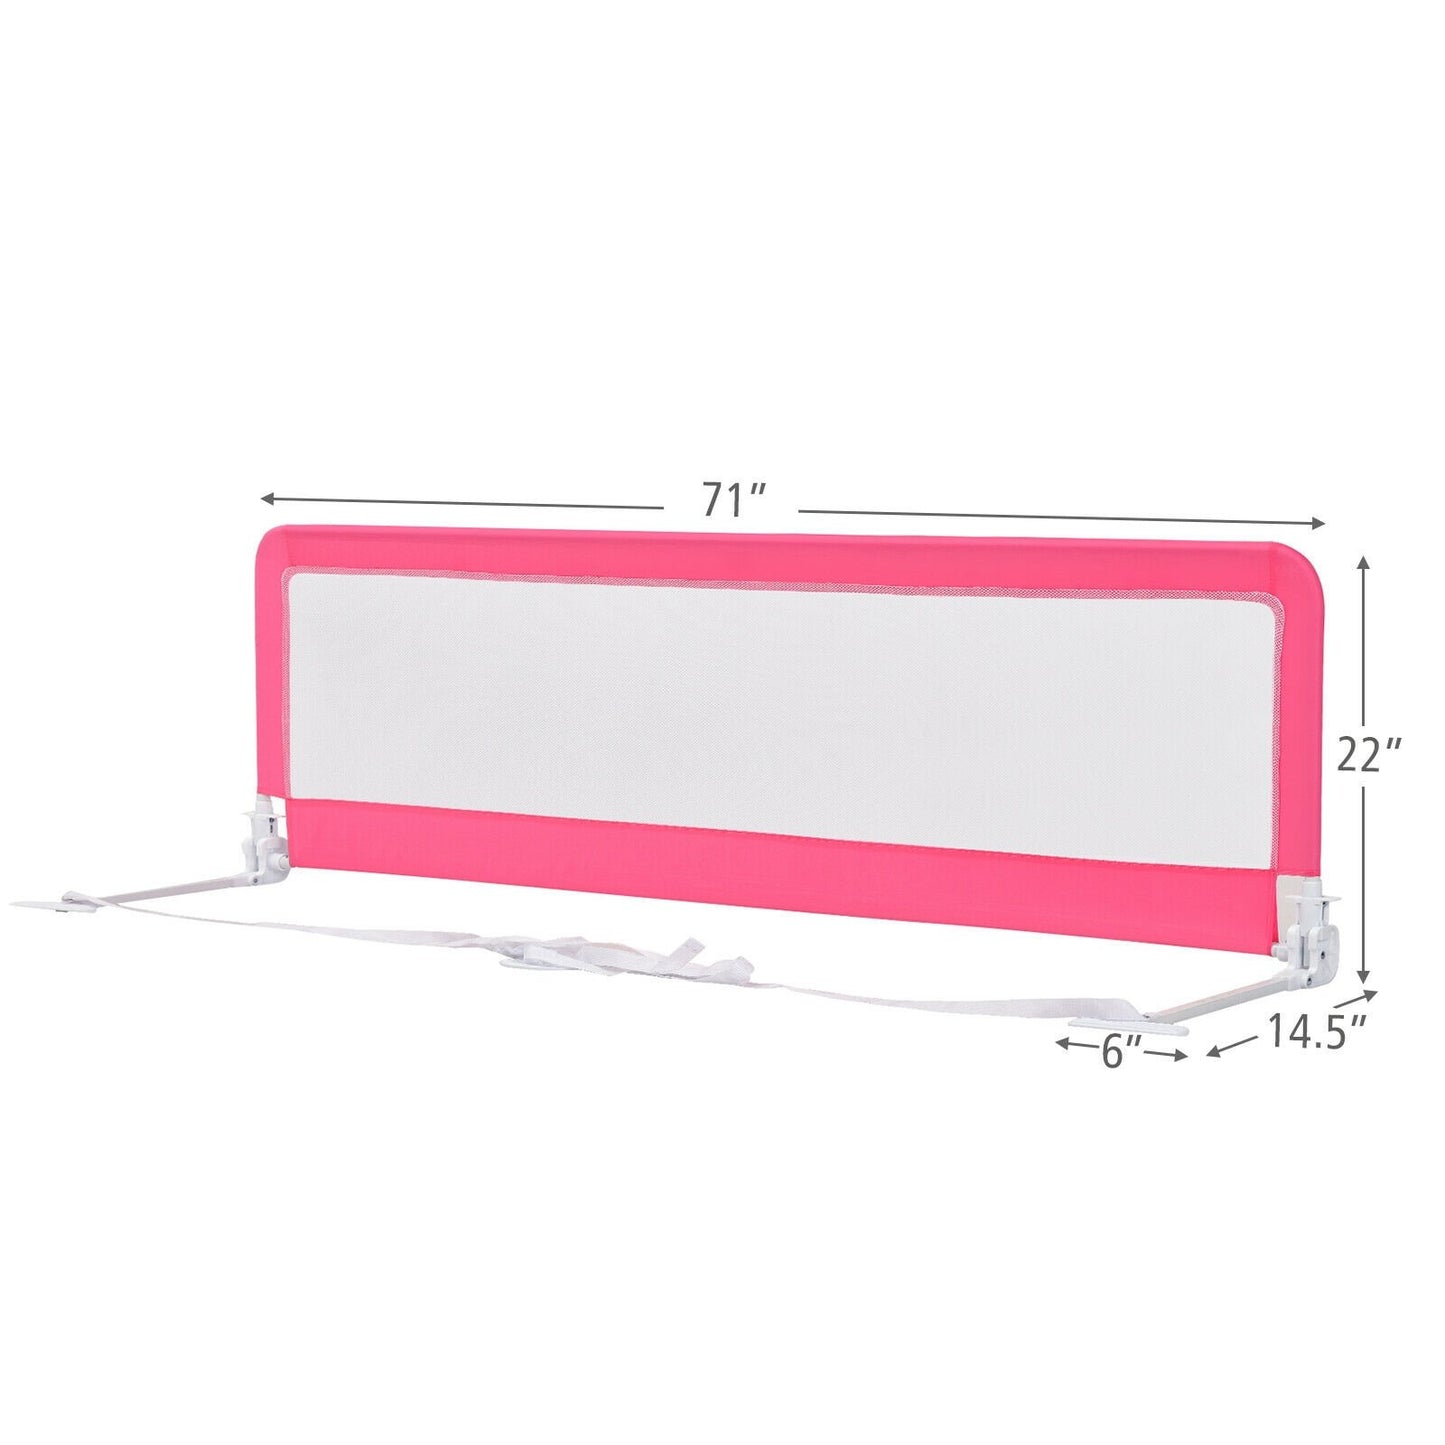 71 Inch Extra Long Swing Down Bed Guardrail with Safety Straps, Pink